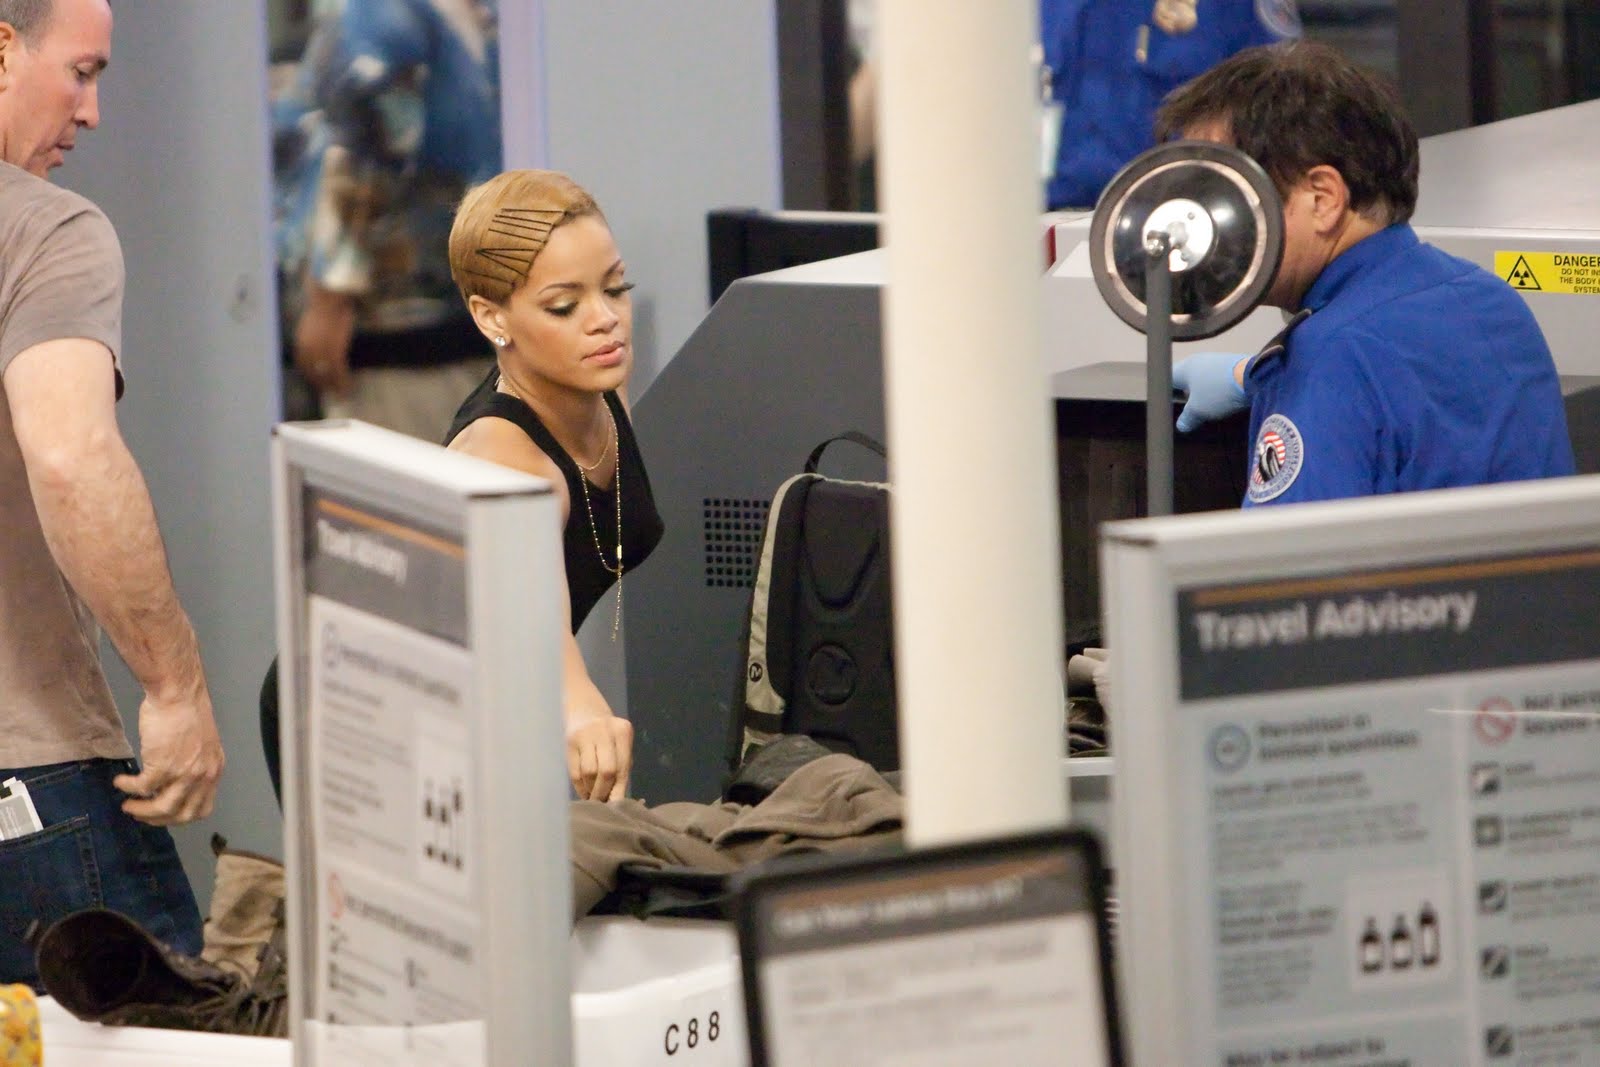 [Rihanna_-_Looks_distressed_as_she_receives_the_full_body_search_while_trying_to_depart_LAX_03.12.09__05.jpg]